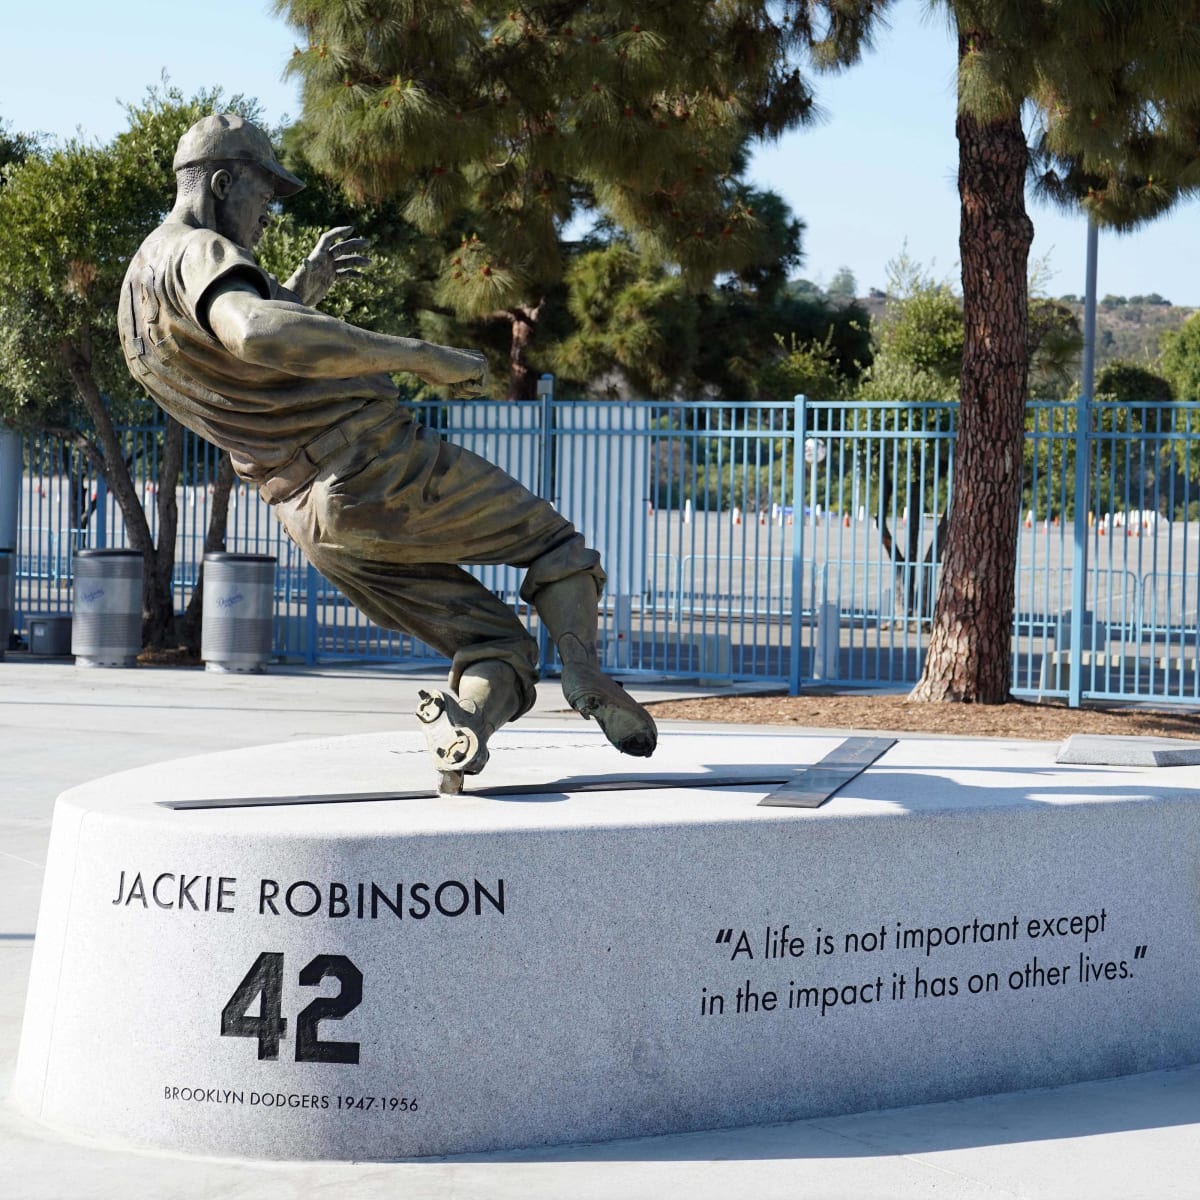 Jackie Robinson: 15 of the most iconic quotes by the Dodgers legend